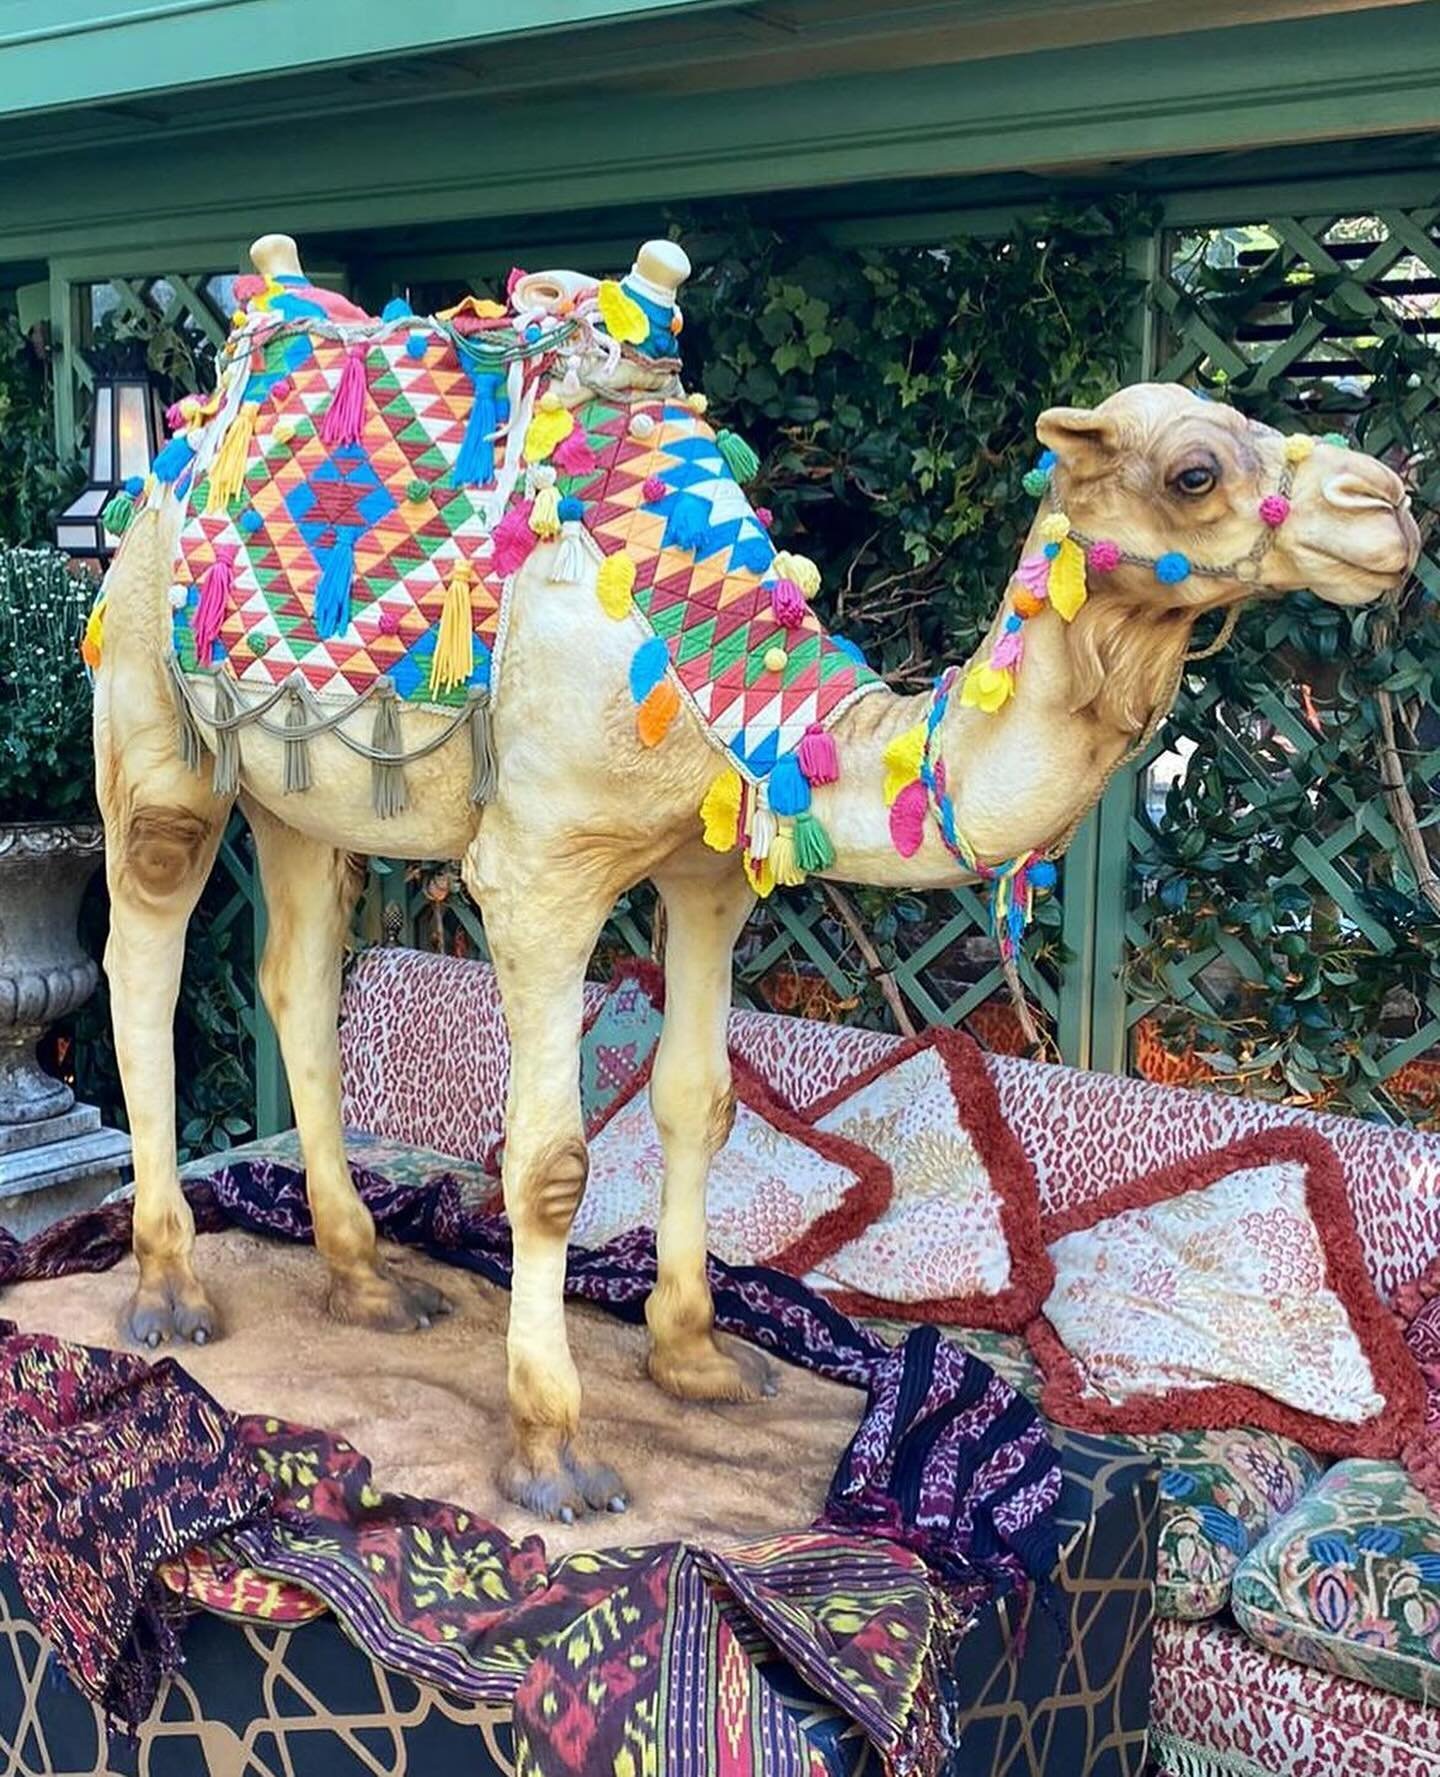 🐪 STOP 🐪 
Is it cake? Yes it is! 

We made this camel cake for an event at @annabelsmayfair a few years ago 🐪💕
.
#cake #cakeart #cakesculpture #camel #camelcake #sculpturecake #extremecakes #luxury #luxuryevents #events #luxurylifestyle #luxuryca